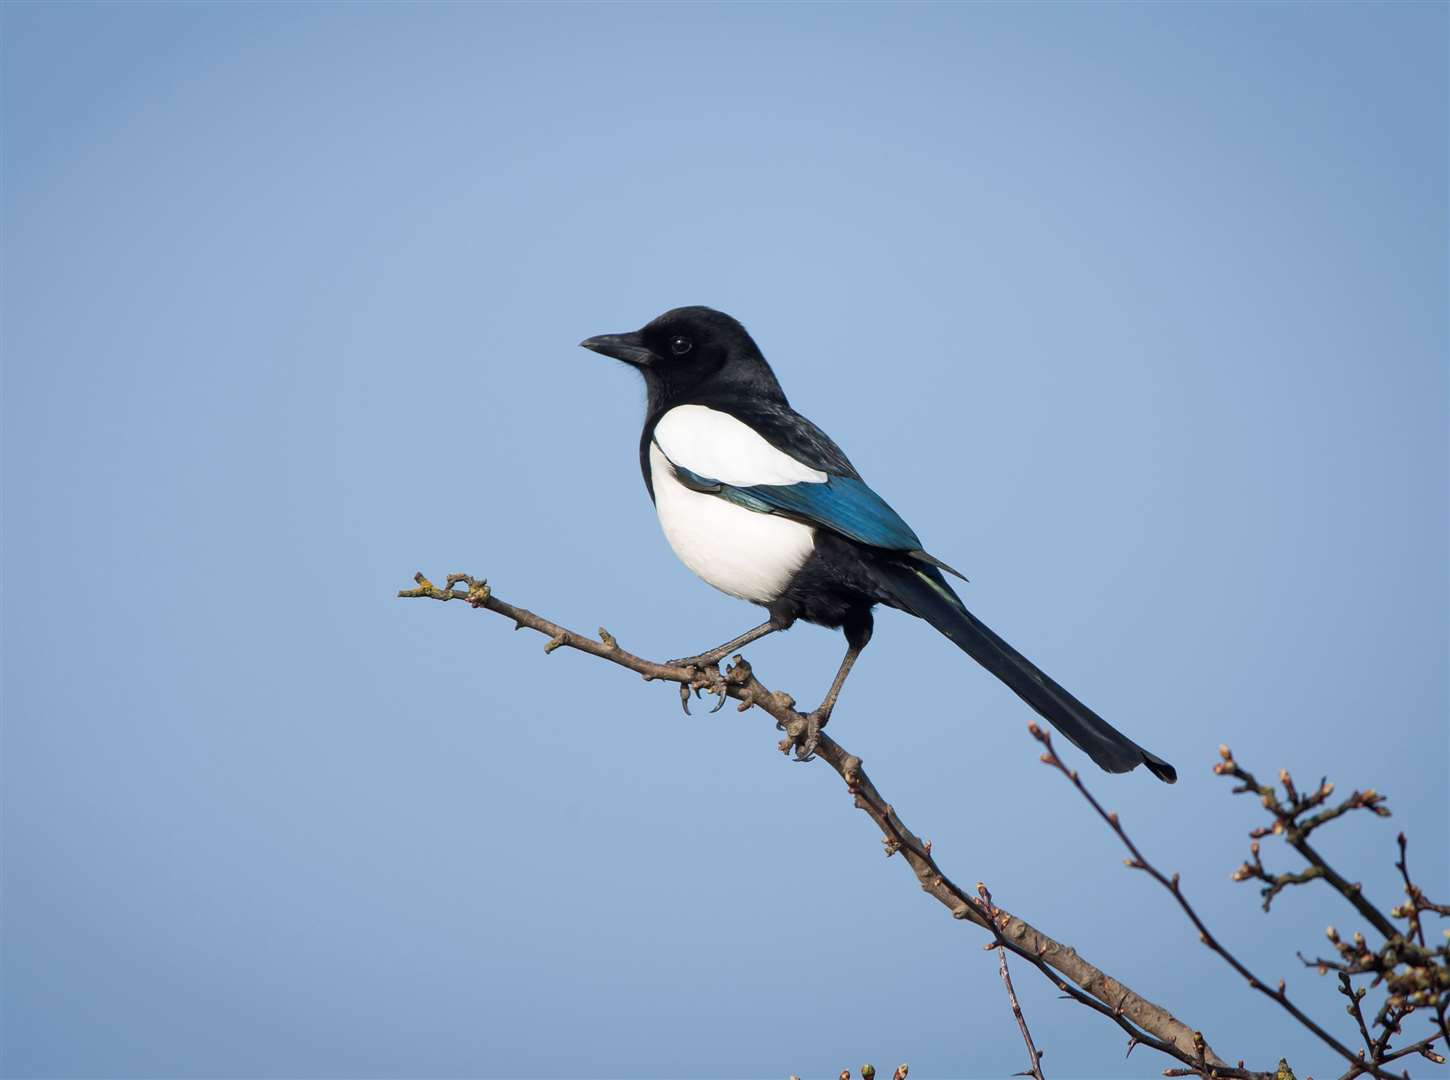 One for sorrow? It is if you're superstitious